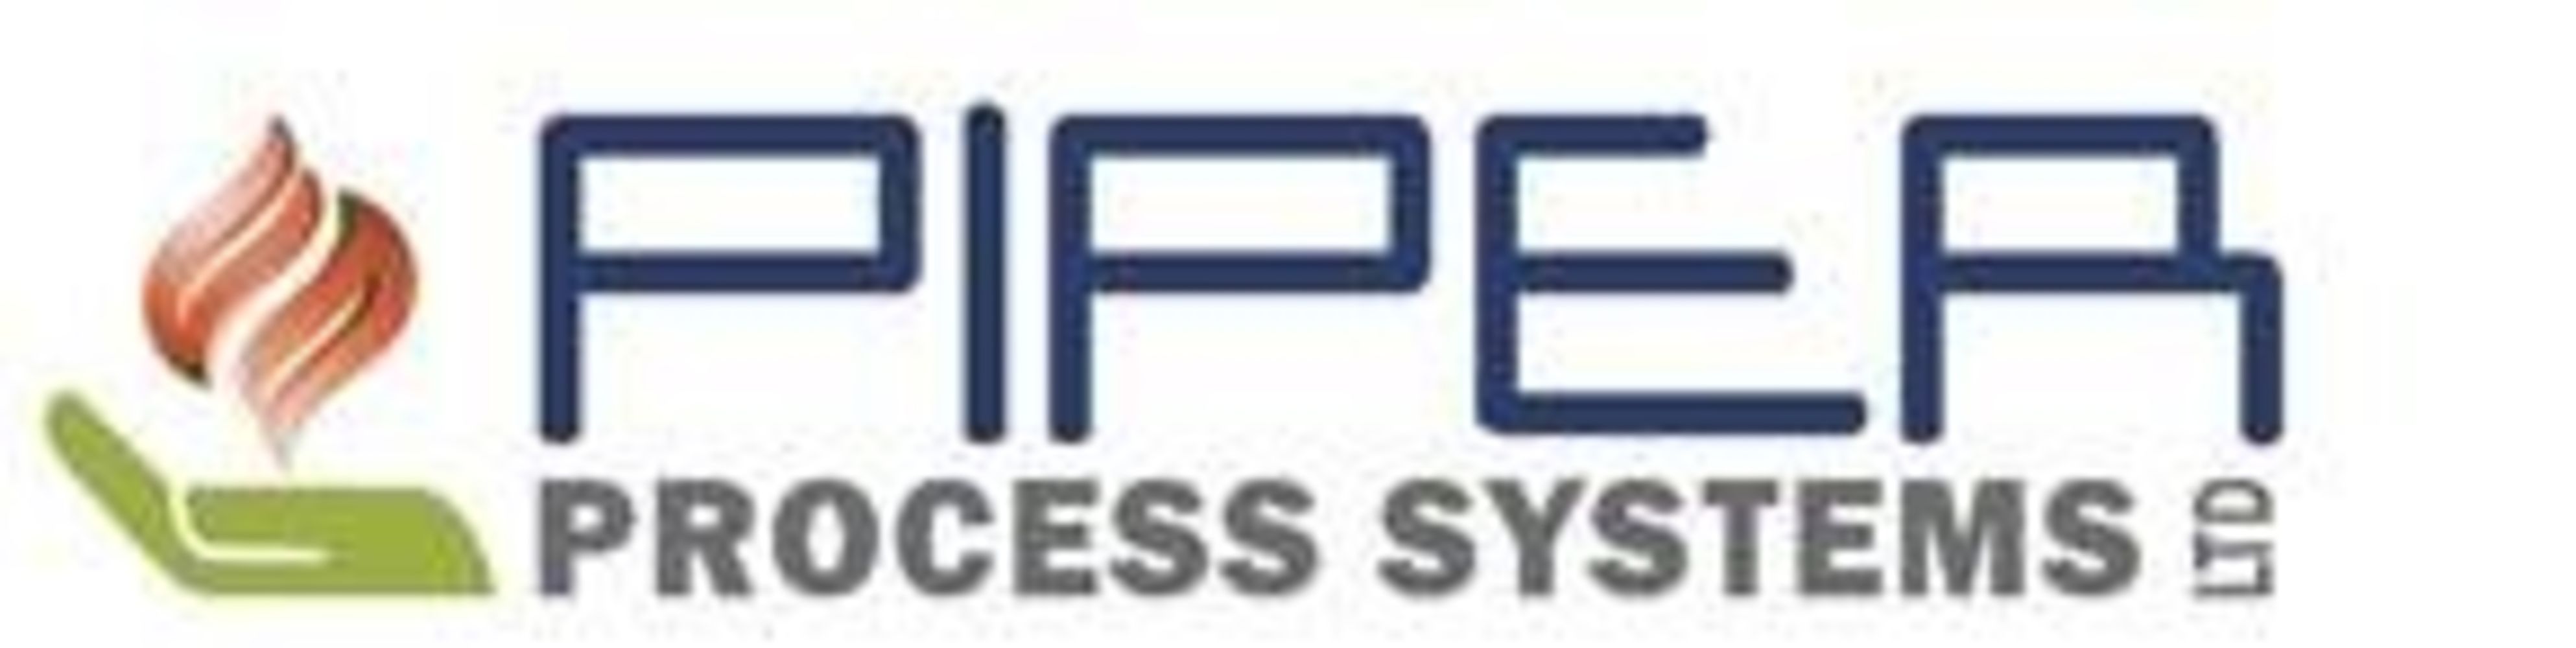 Unreserved Timed Online Retirement Auction of Piper Process Systems Ltd. and 1566193 Alberta Inc.